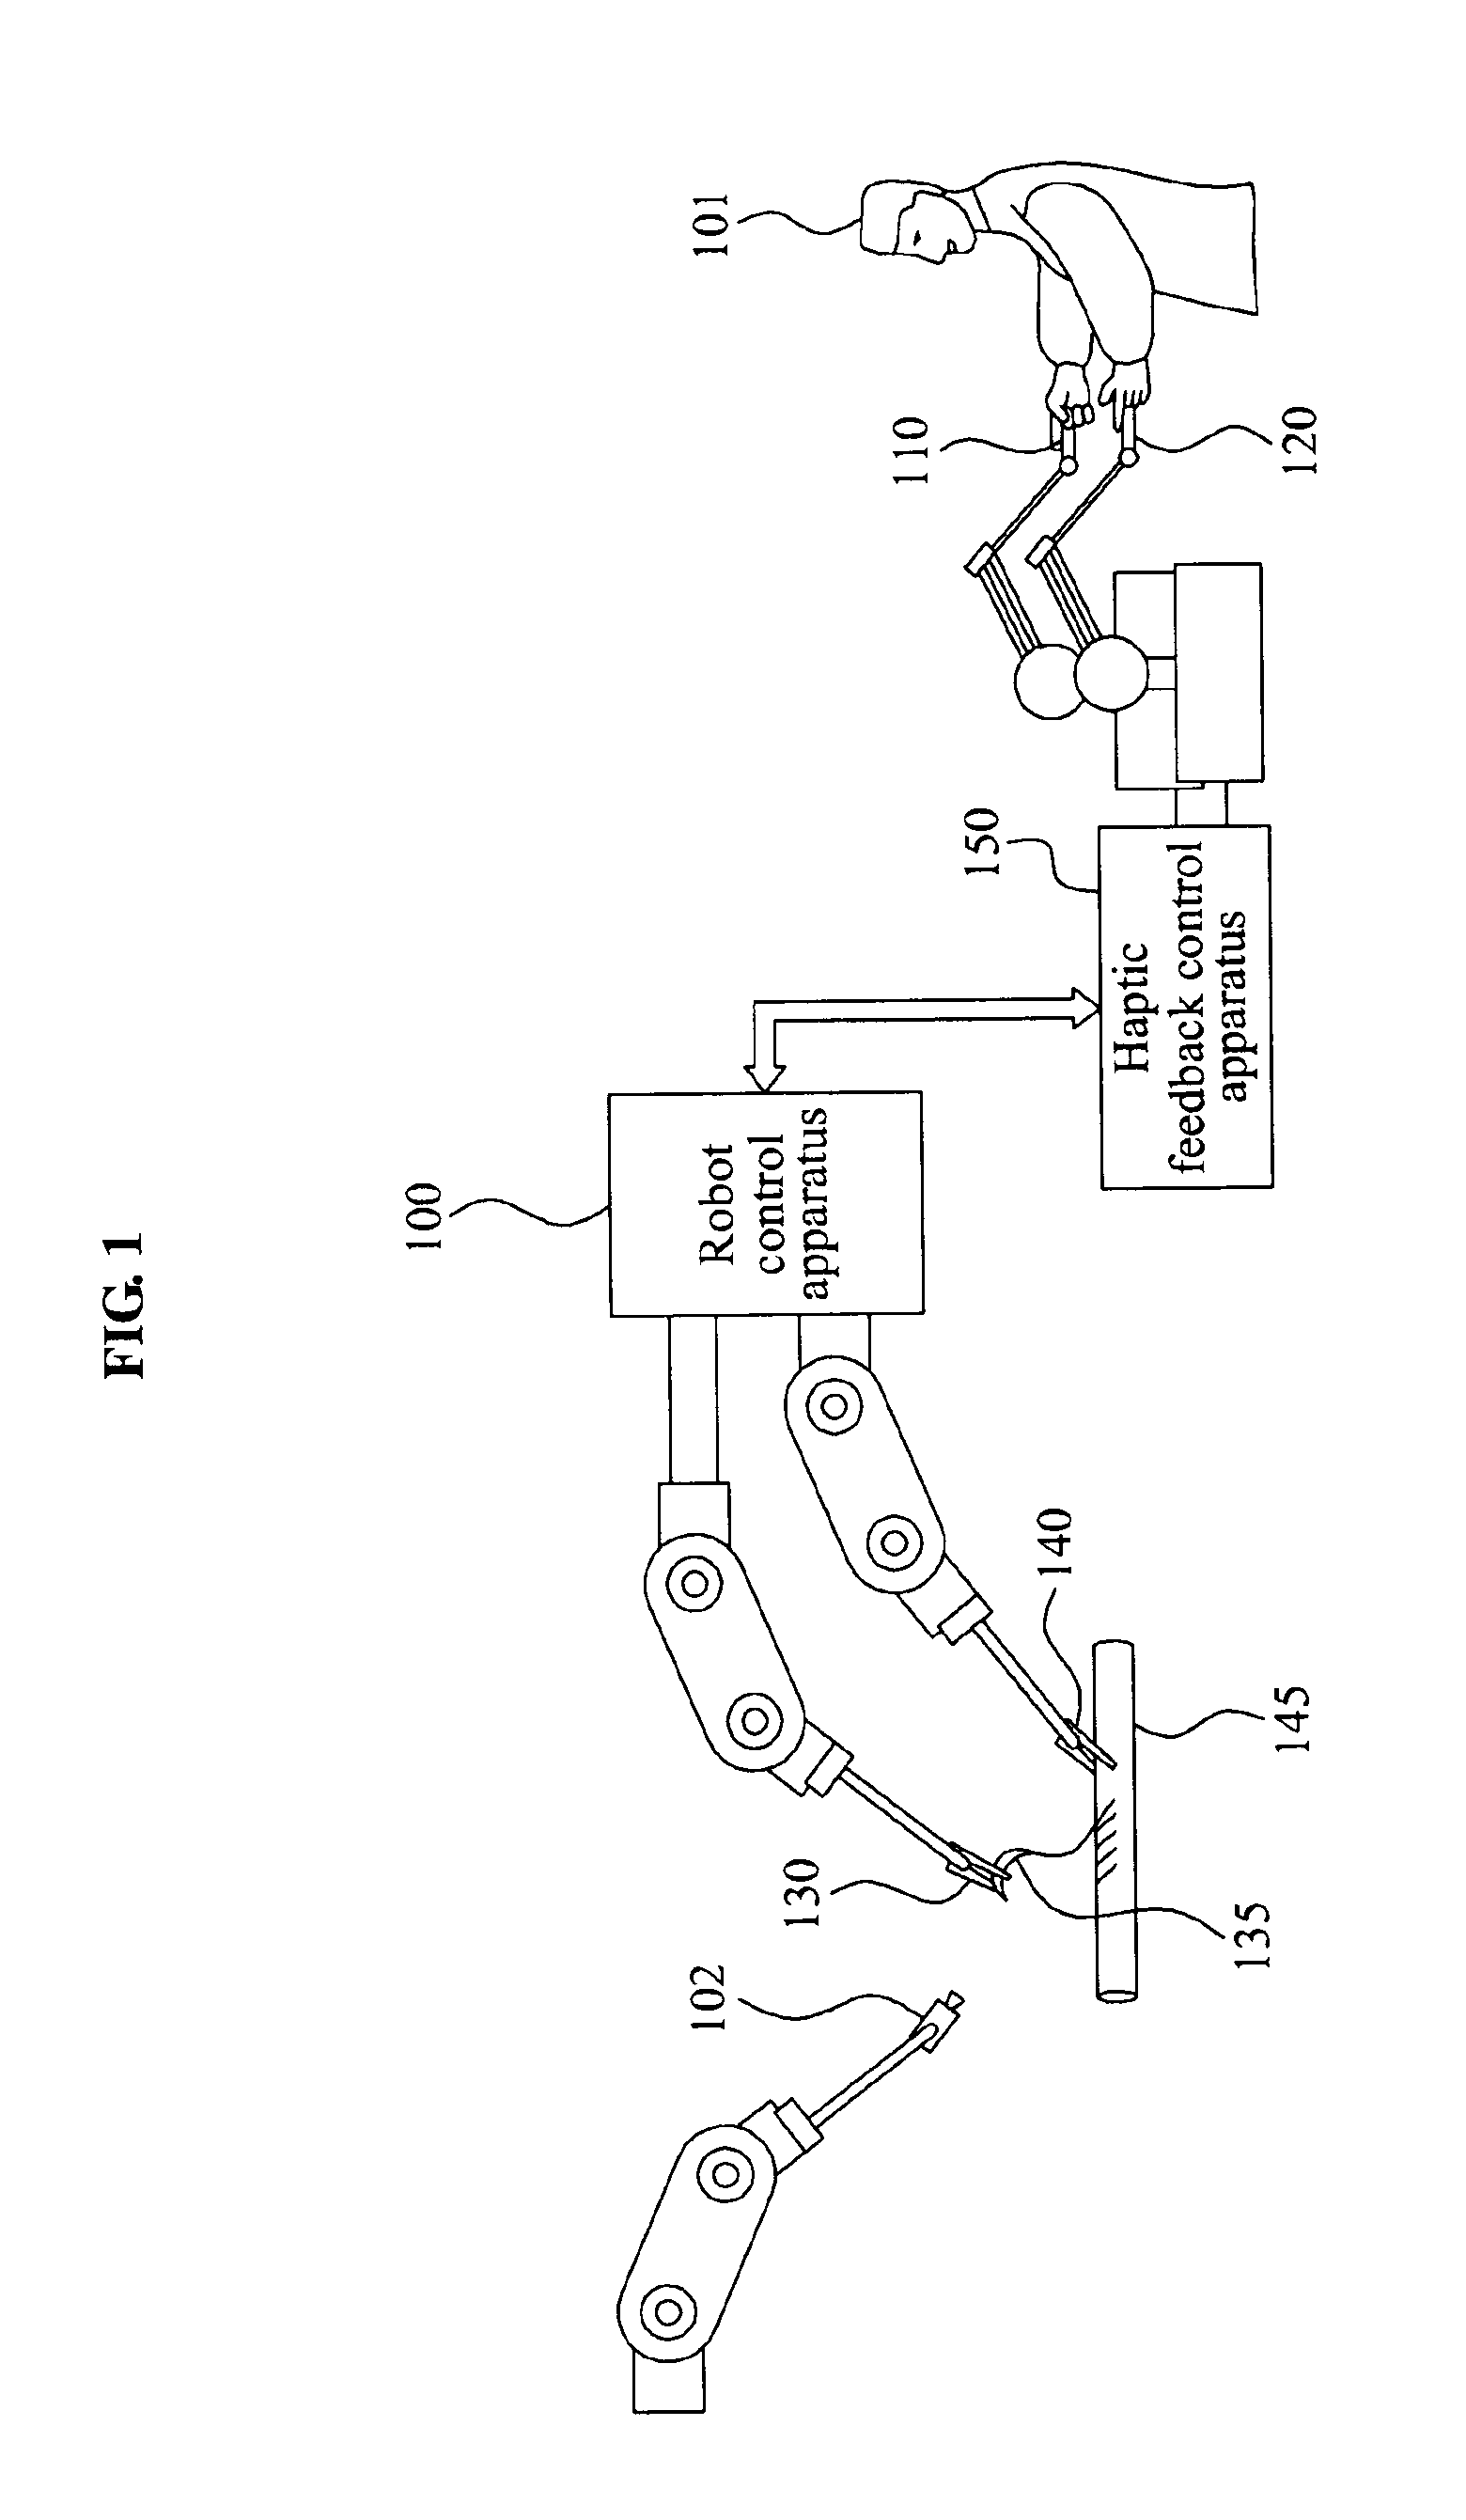 Apparatus and method for controlling force to be used for motion of surgical robot